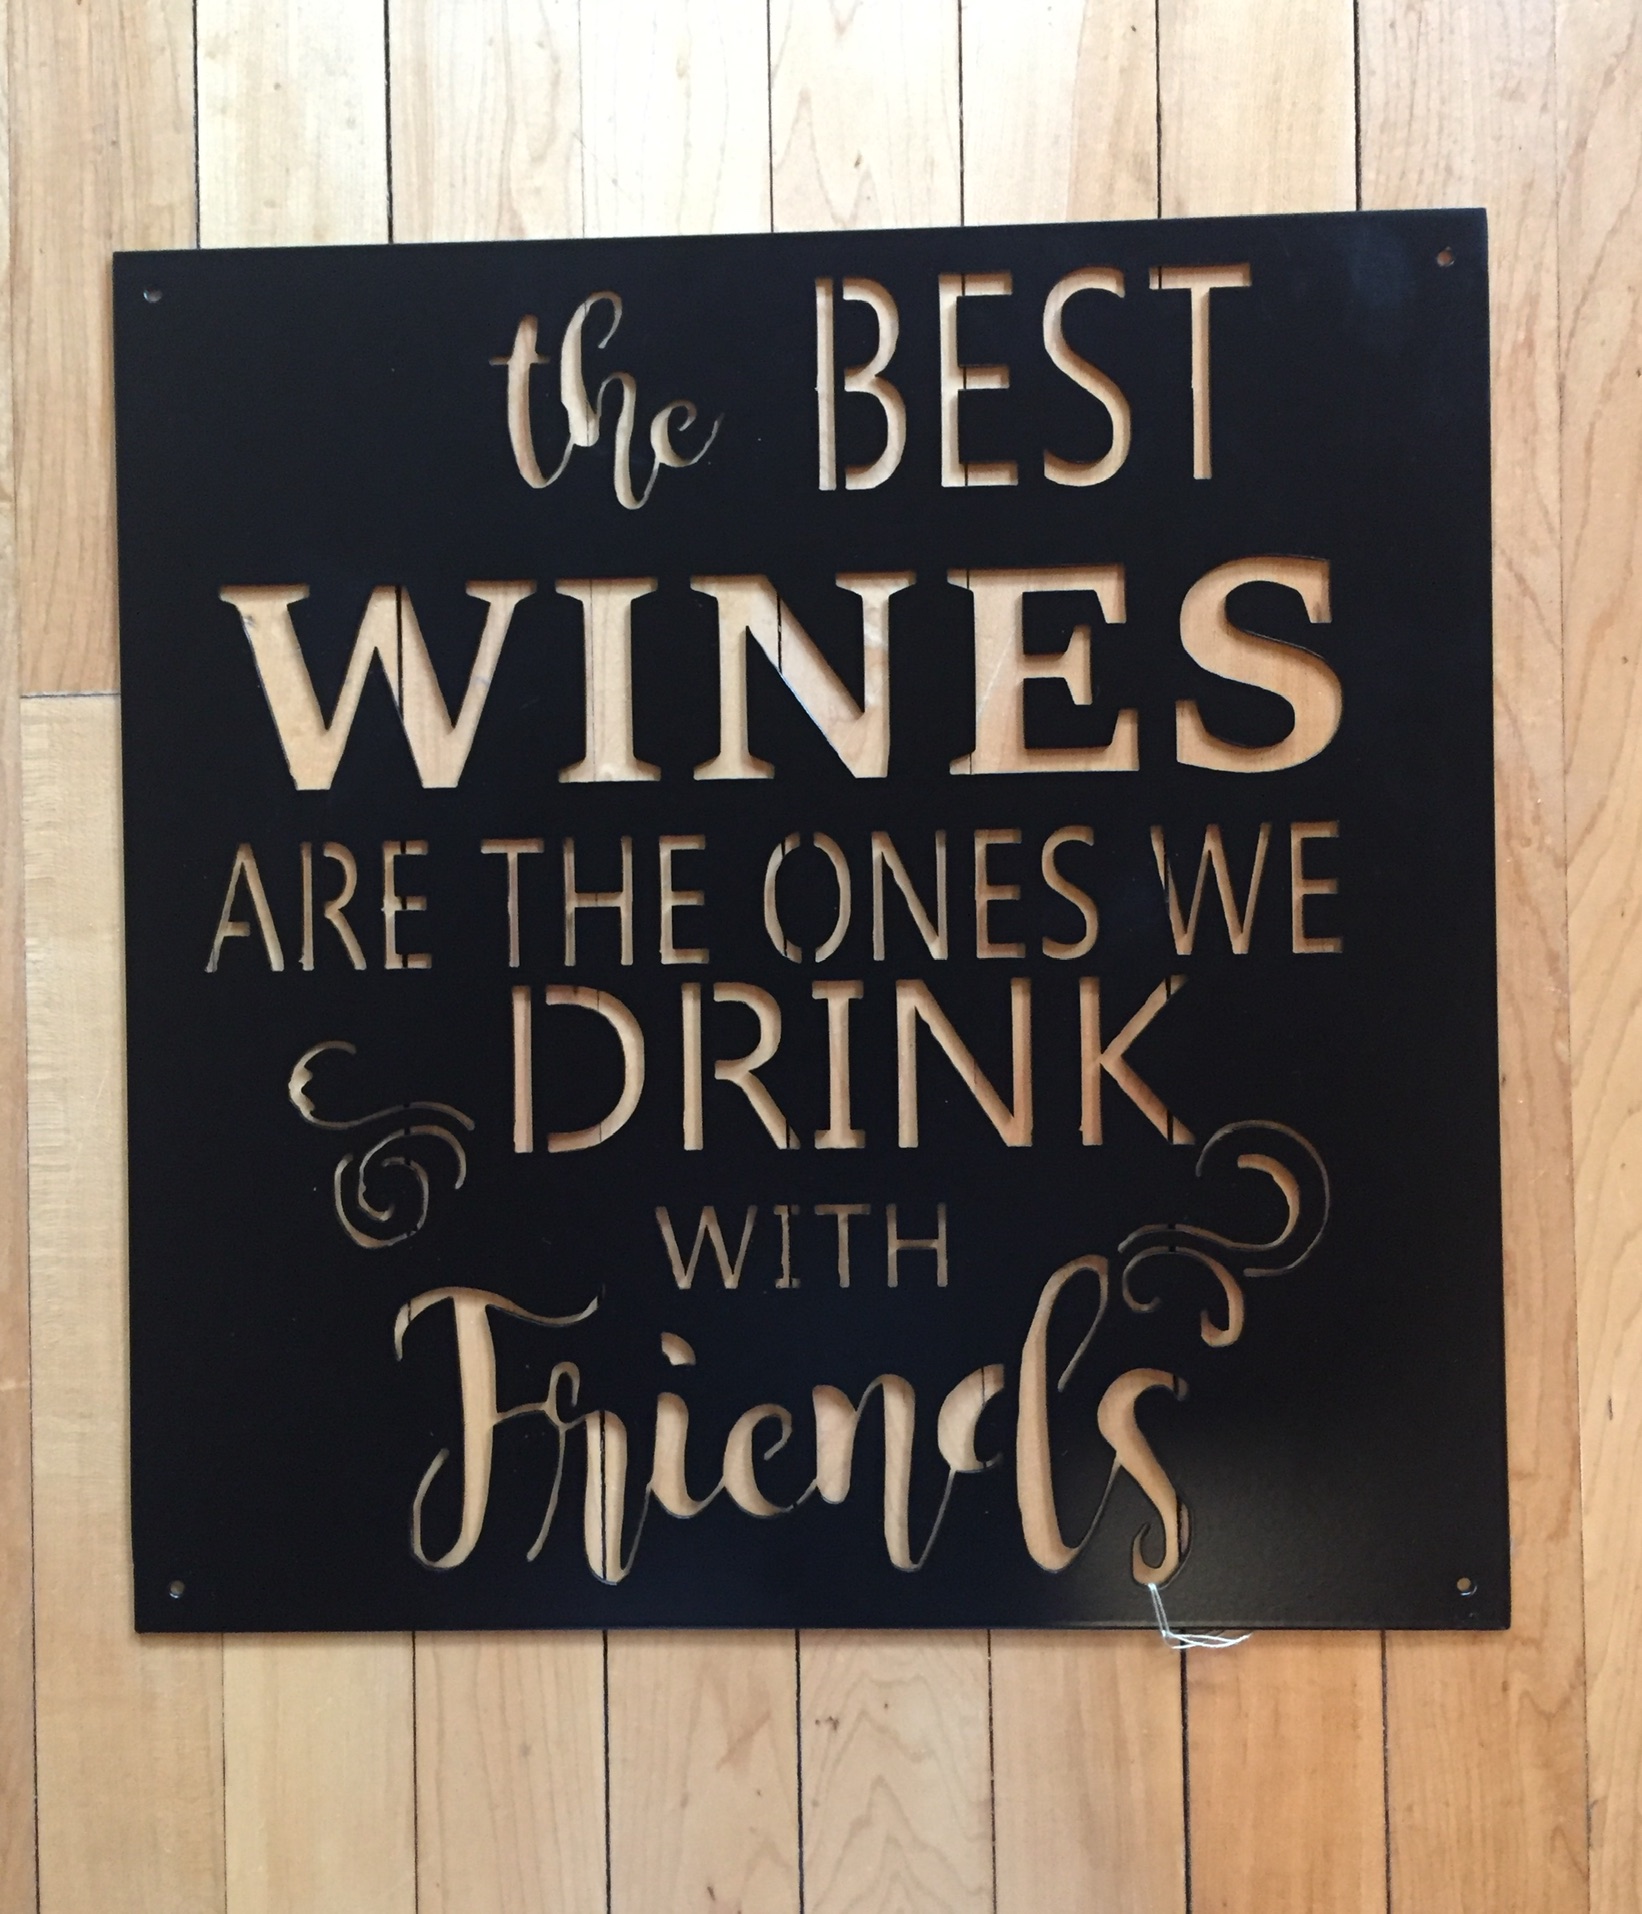 THE BEST WINES ARE THE ONES WE DRINK WITH FRIENDS

H: 16.5 INCHES    W: 16 INCHES

INSTORE PICK-UP OR SHIPPING